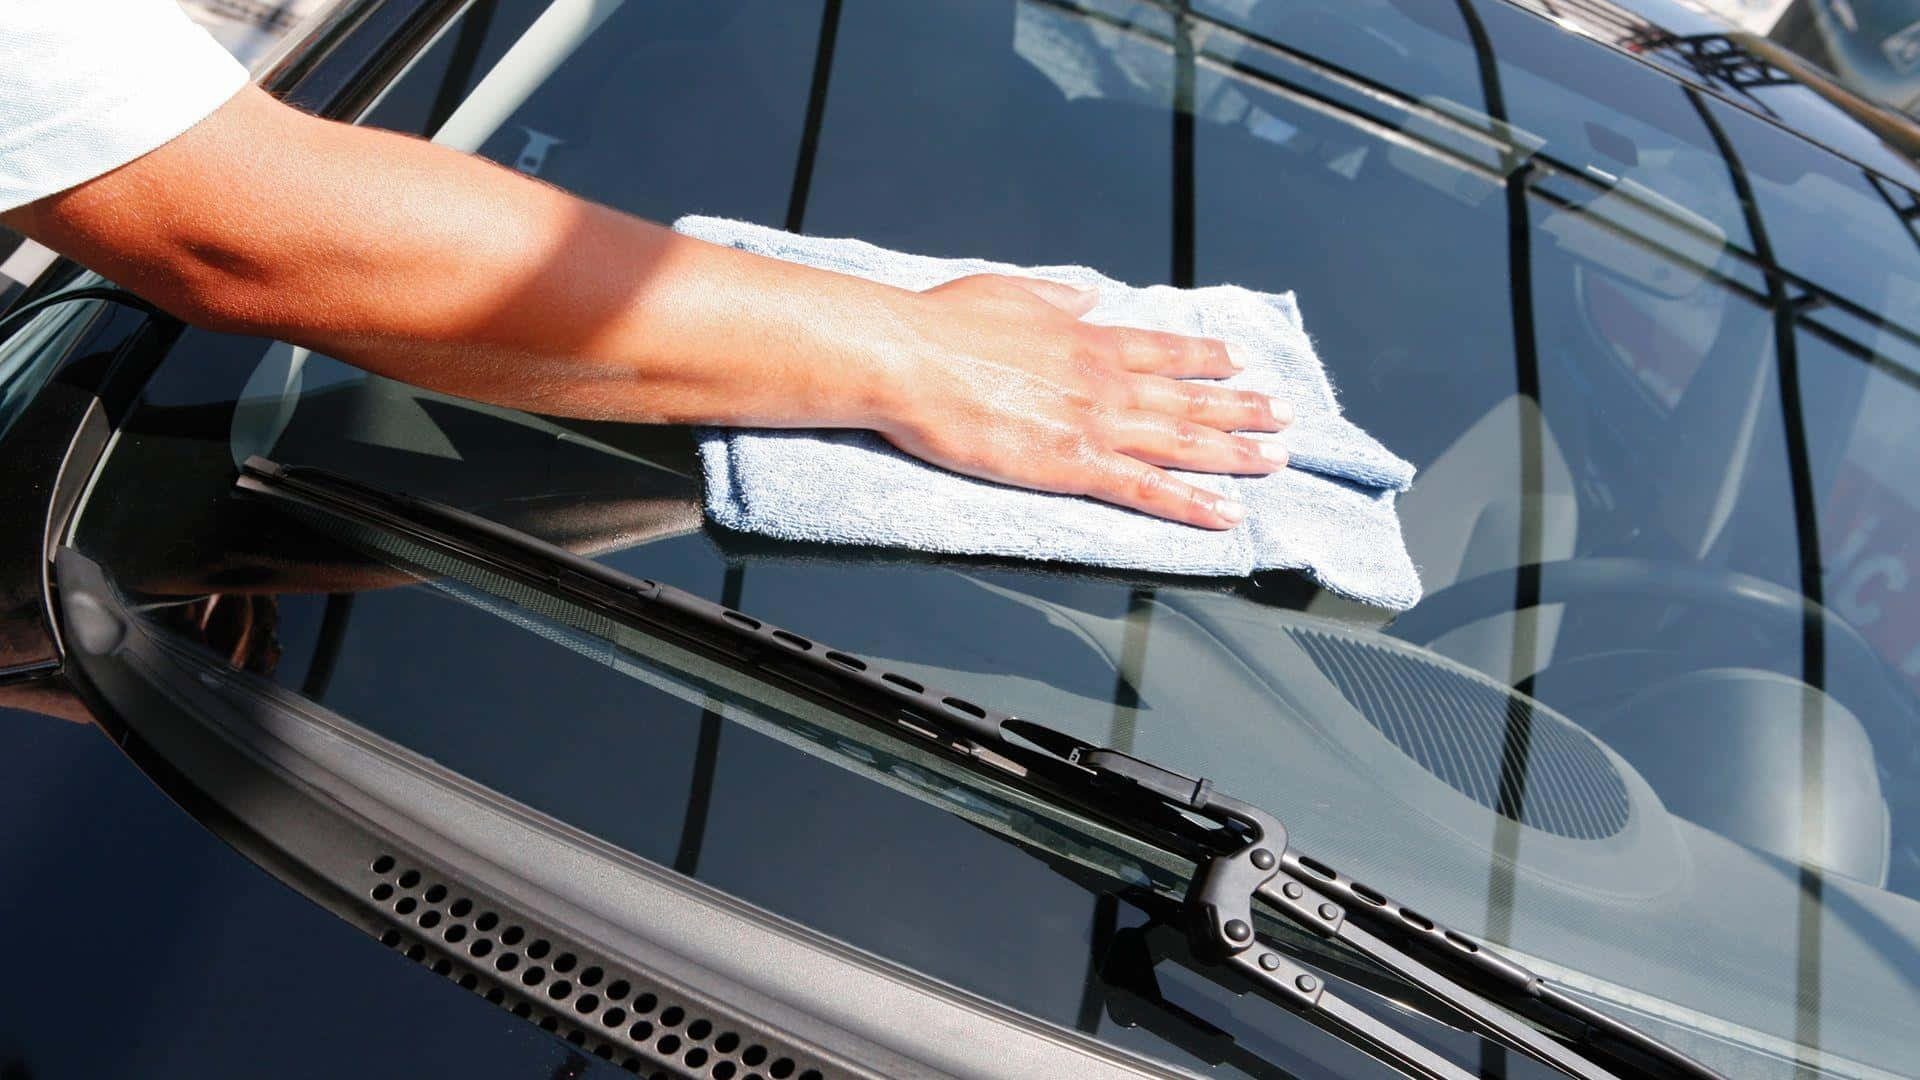 Get a shine on your car with a professional car wash